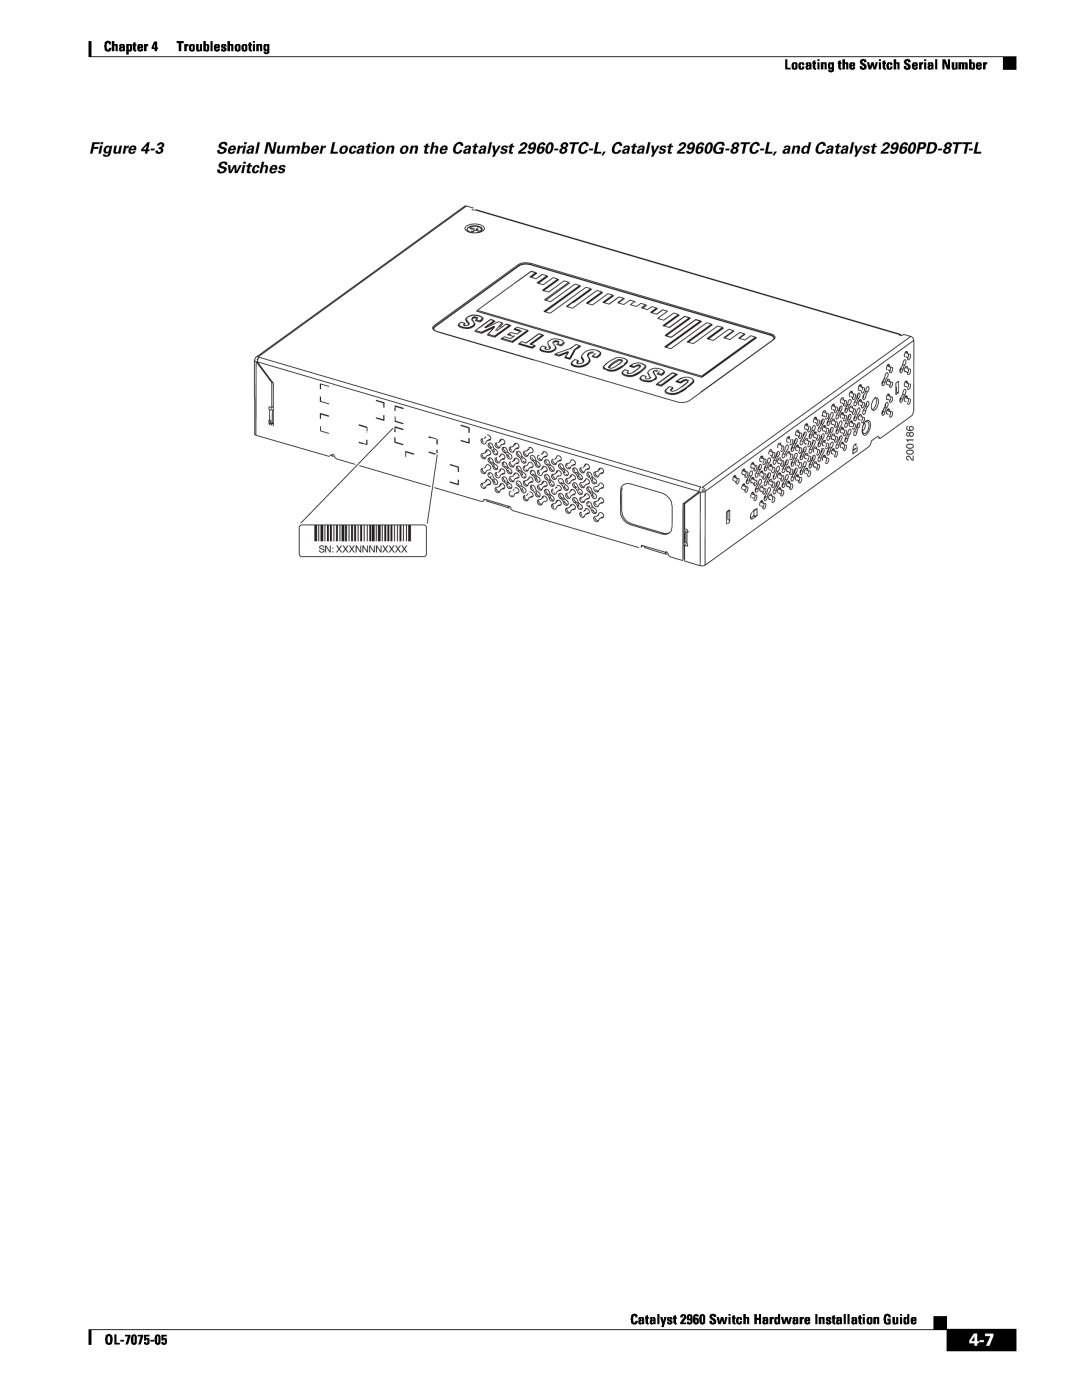 Cisco Systems Troubleshooting Locating the Switch Serial Number, Catalyst 2960 Switch Hardware Installation Guide 